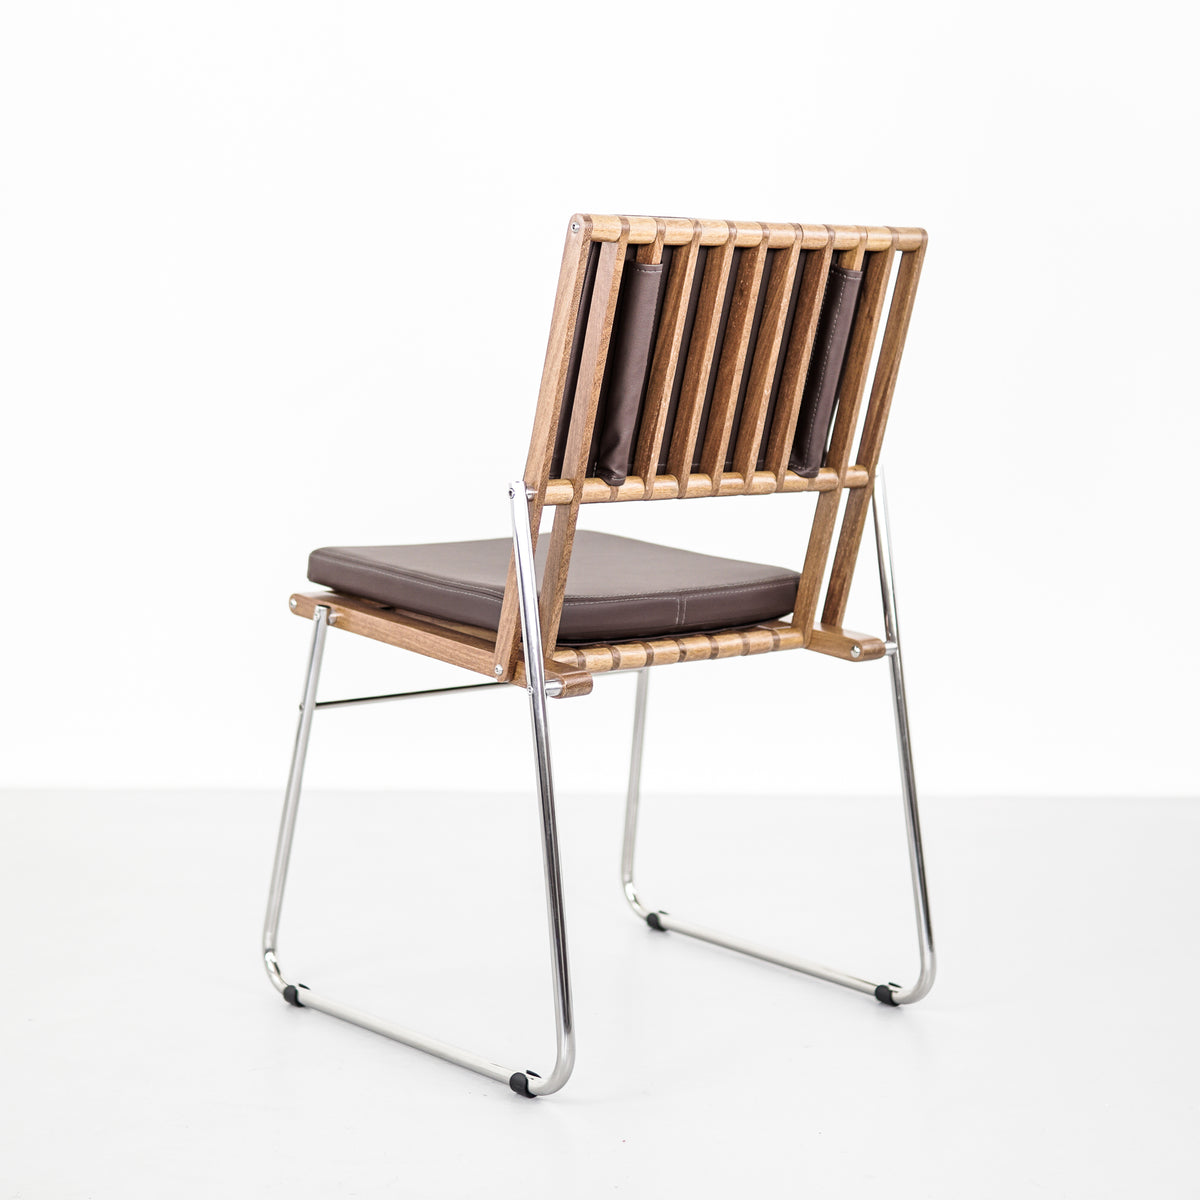 Leather Chair with Stainless Steel and Wood | Brown and Sand colors | RIPA Chair | Pedro Useche